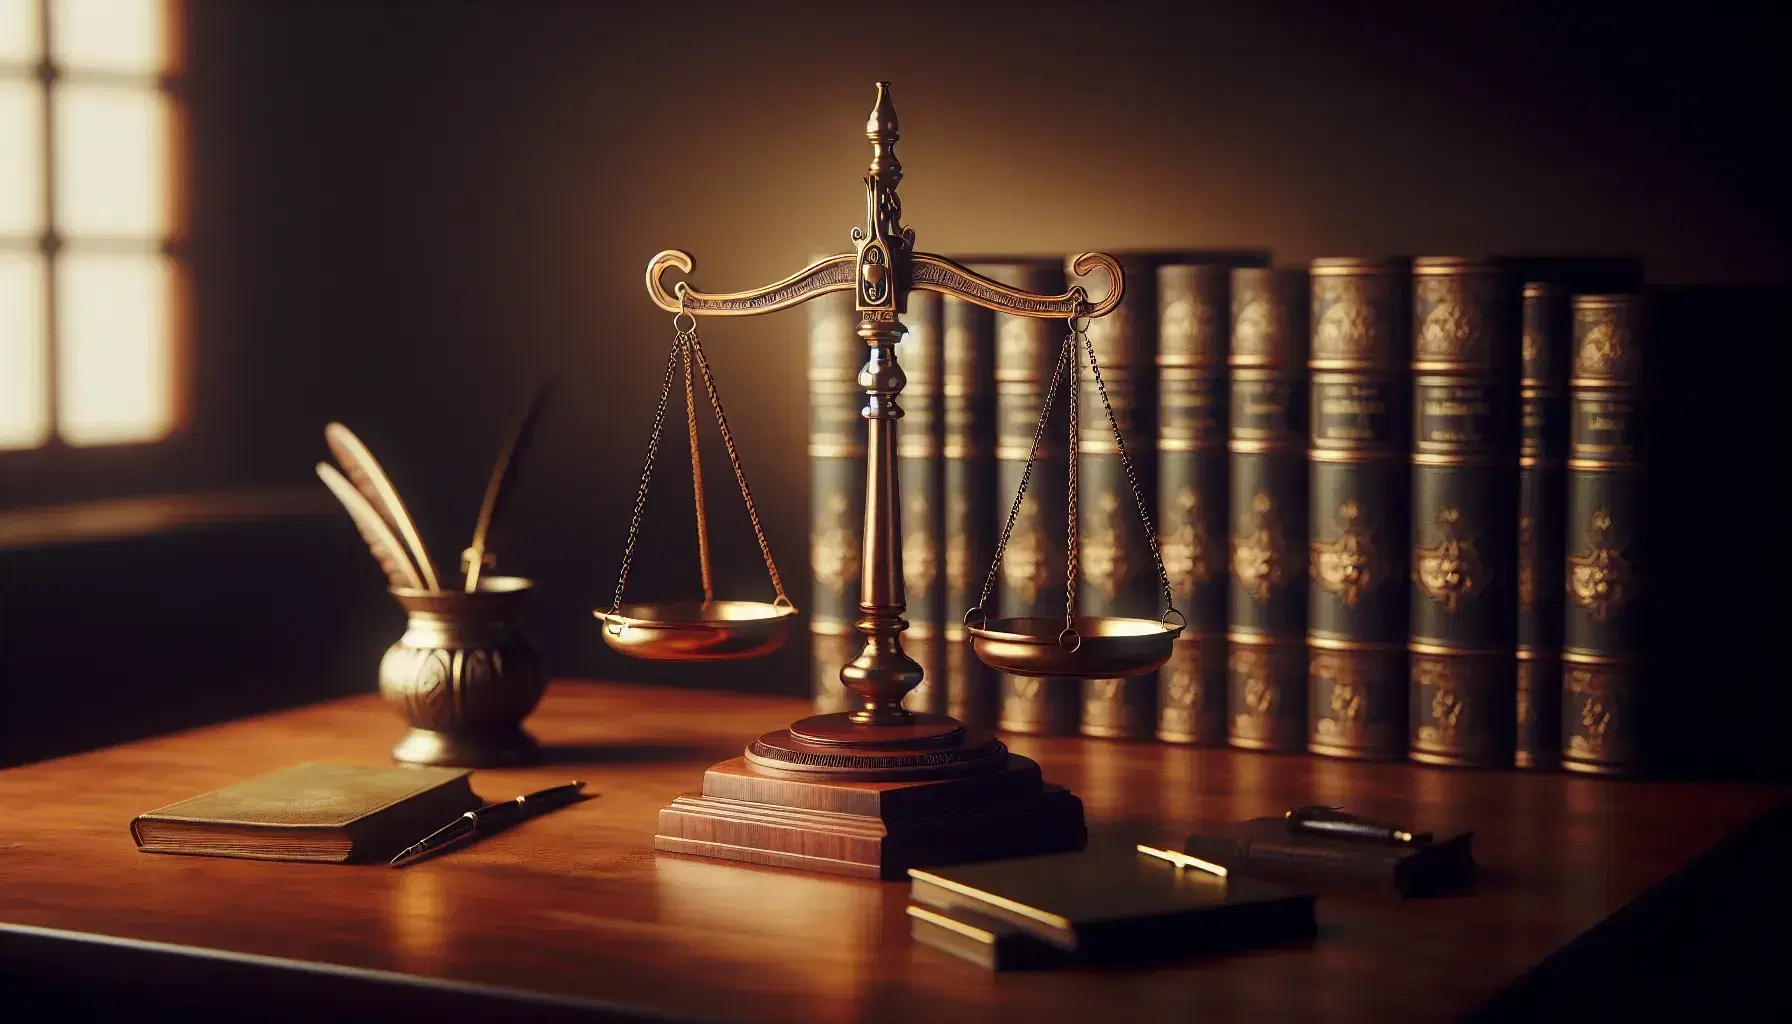 Balanced wooden justice scale on a mahogany desk with polished brass pans, flanked by legal tomes and an antique quill pen with inkwell.